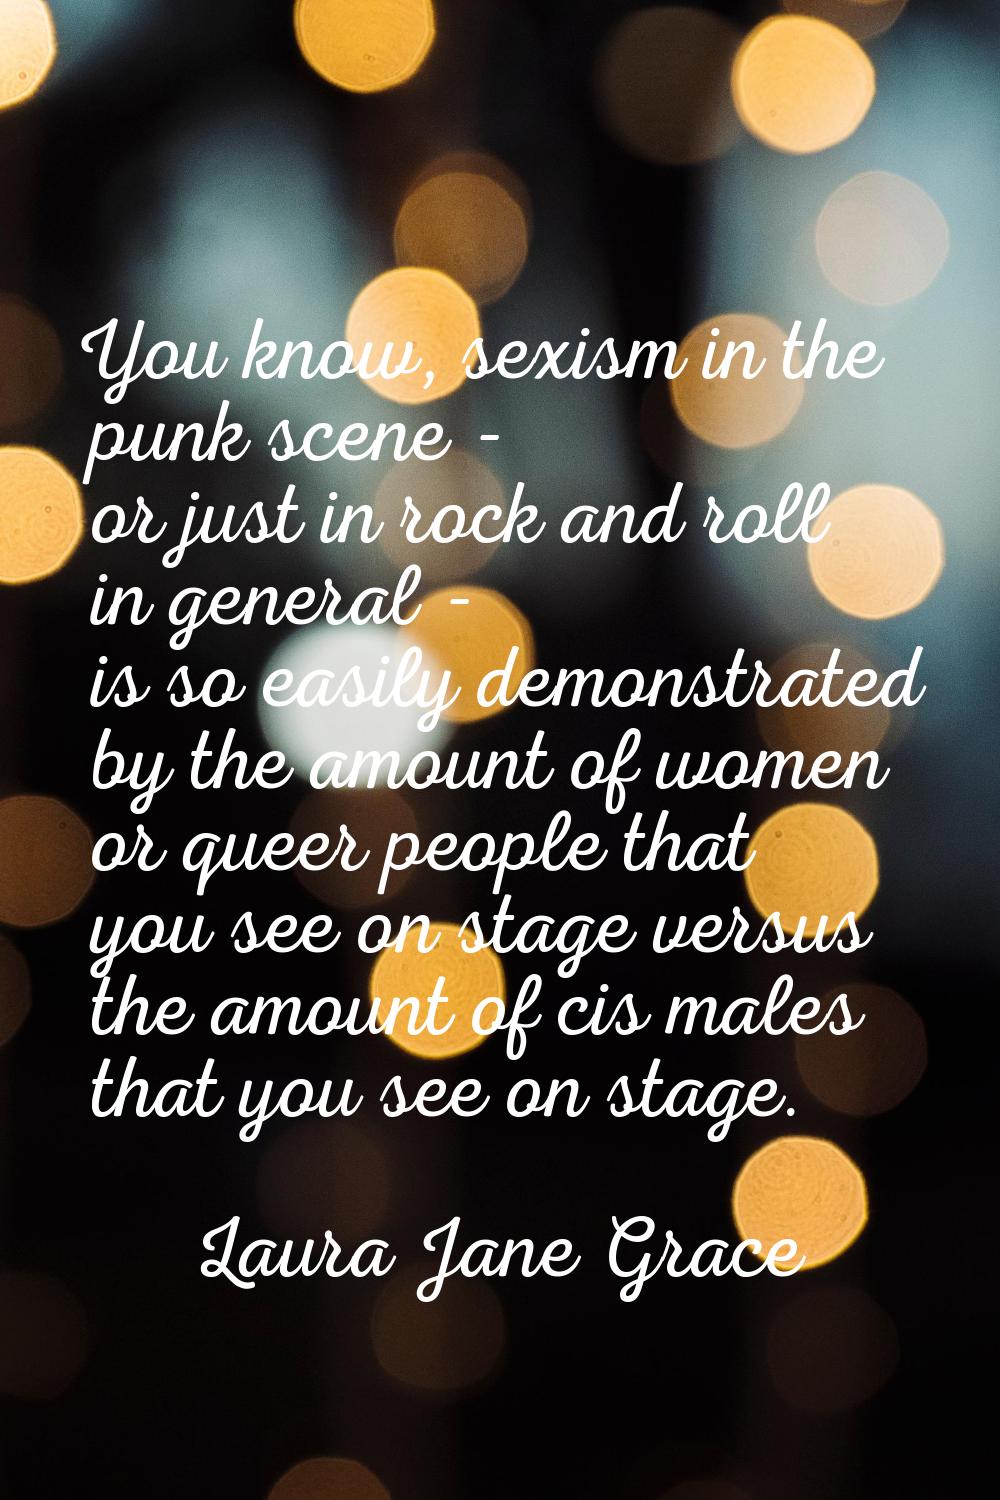 You know, sexism in the punk scene - or just in rock and roll in general - is so easily demonstrate